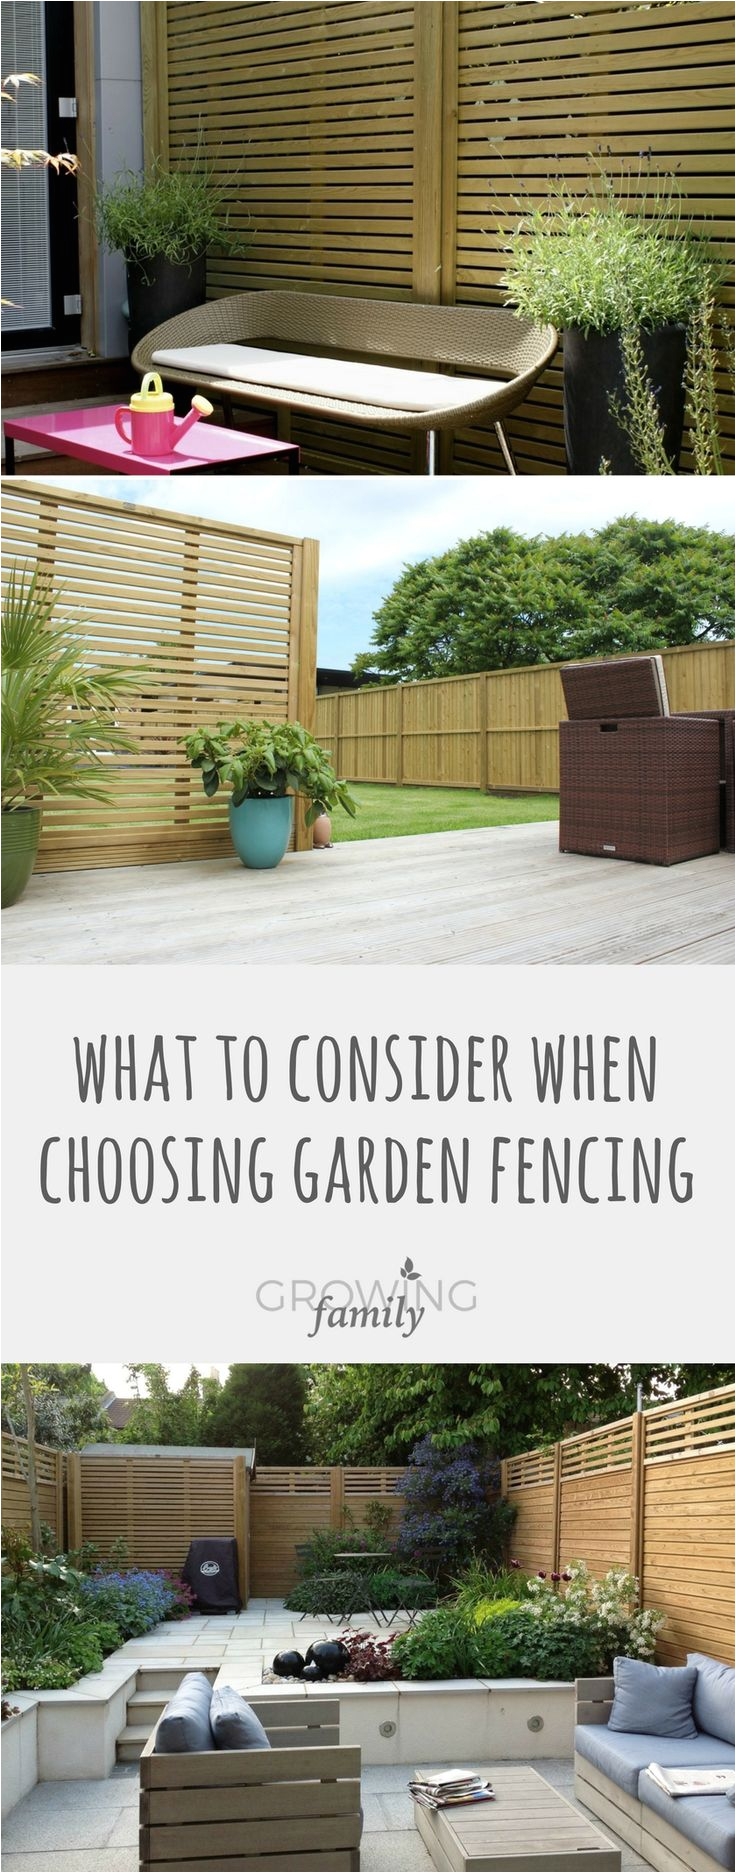 as well as serving a practical purpose garden fencing can really enhance the look of